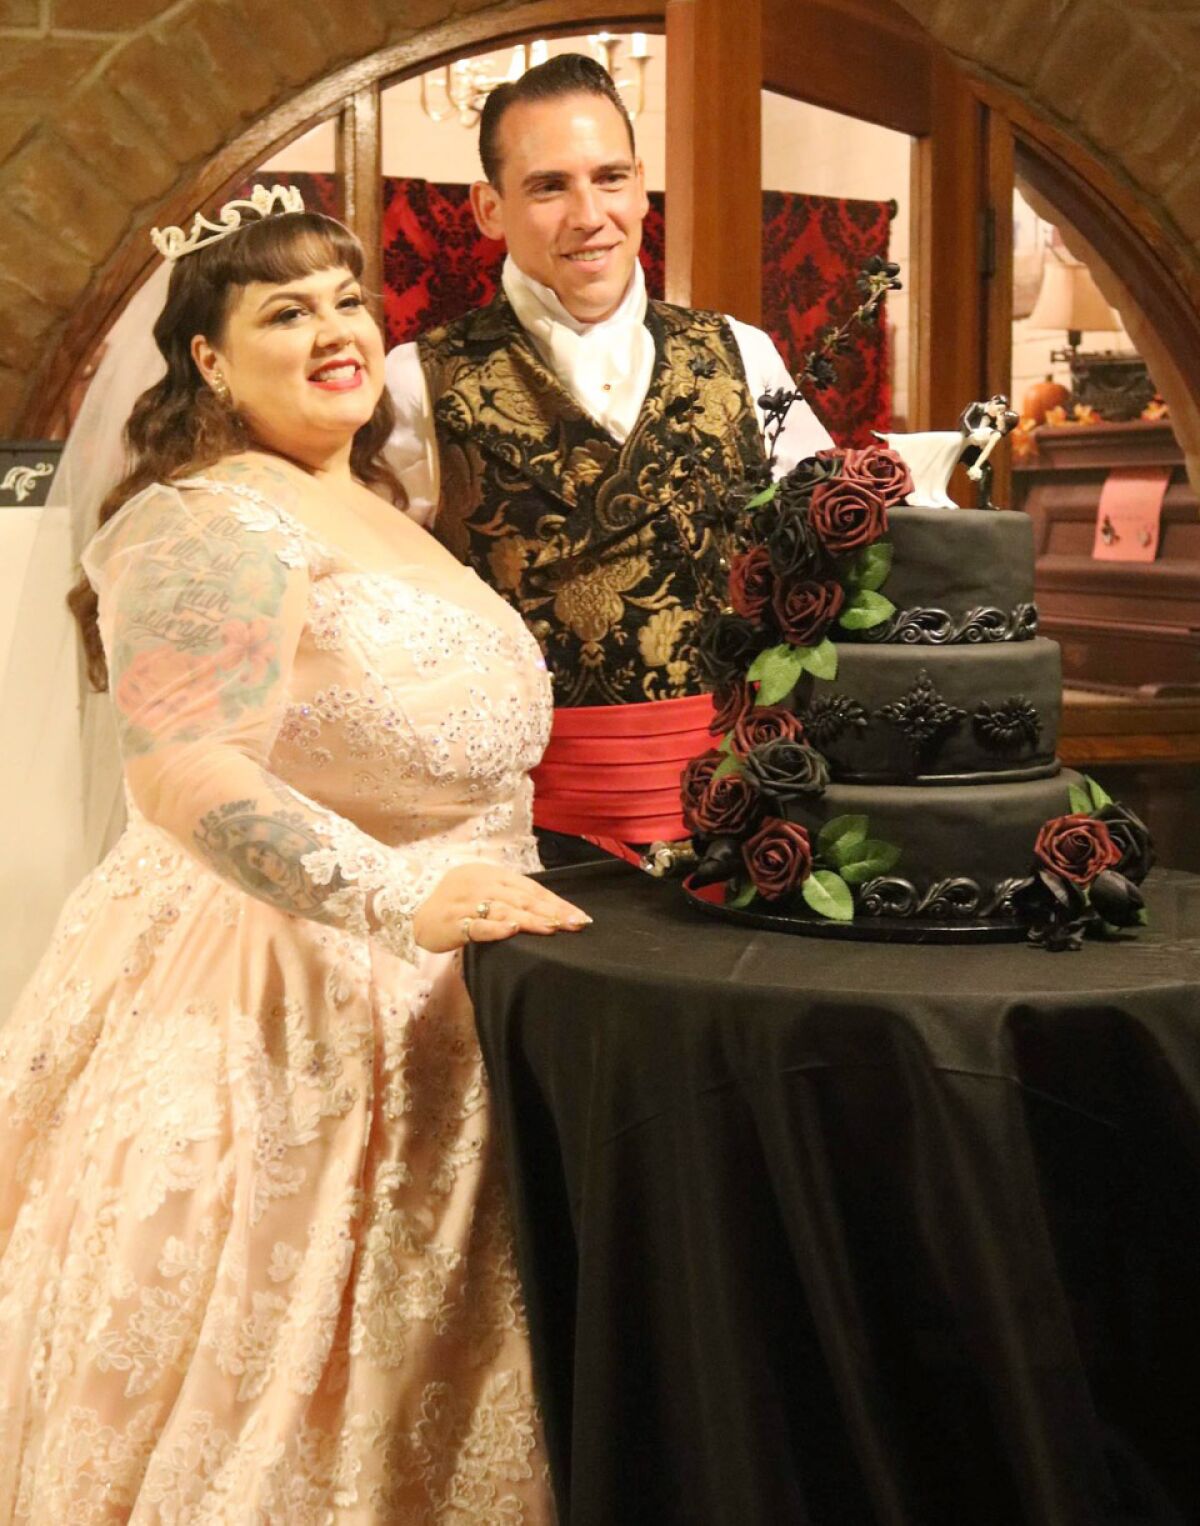 Krystine and Garrett Wear celebrated their Oct. 29 wedding ceremony with an elaborate black cake made by Alexis Henshaw.